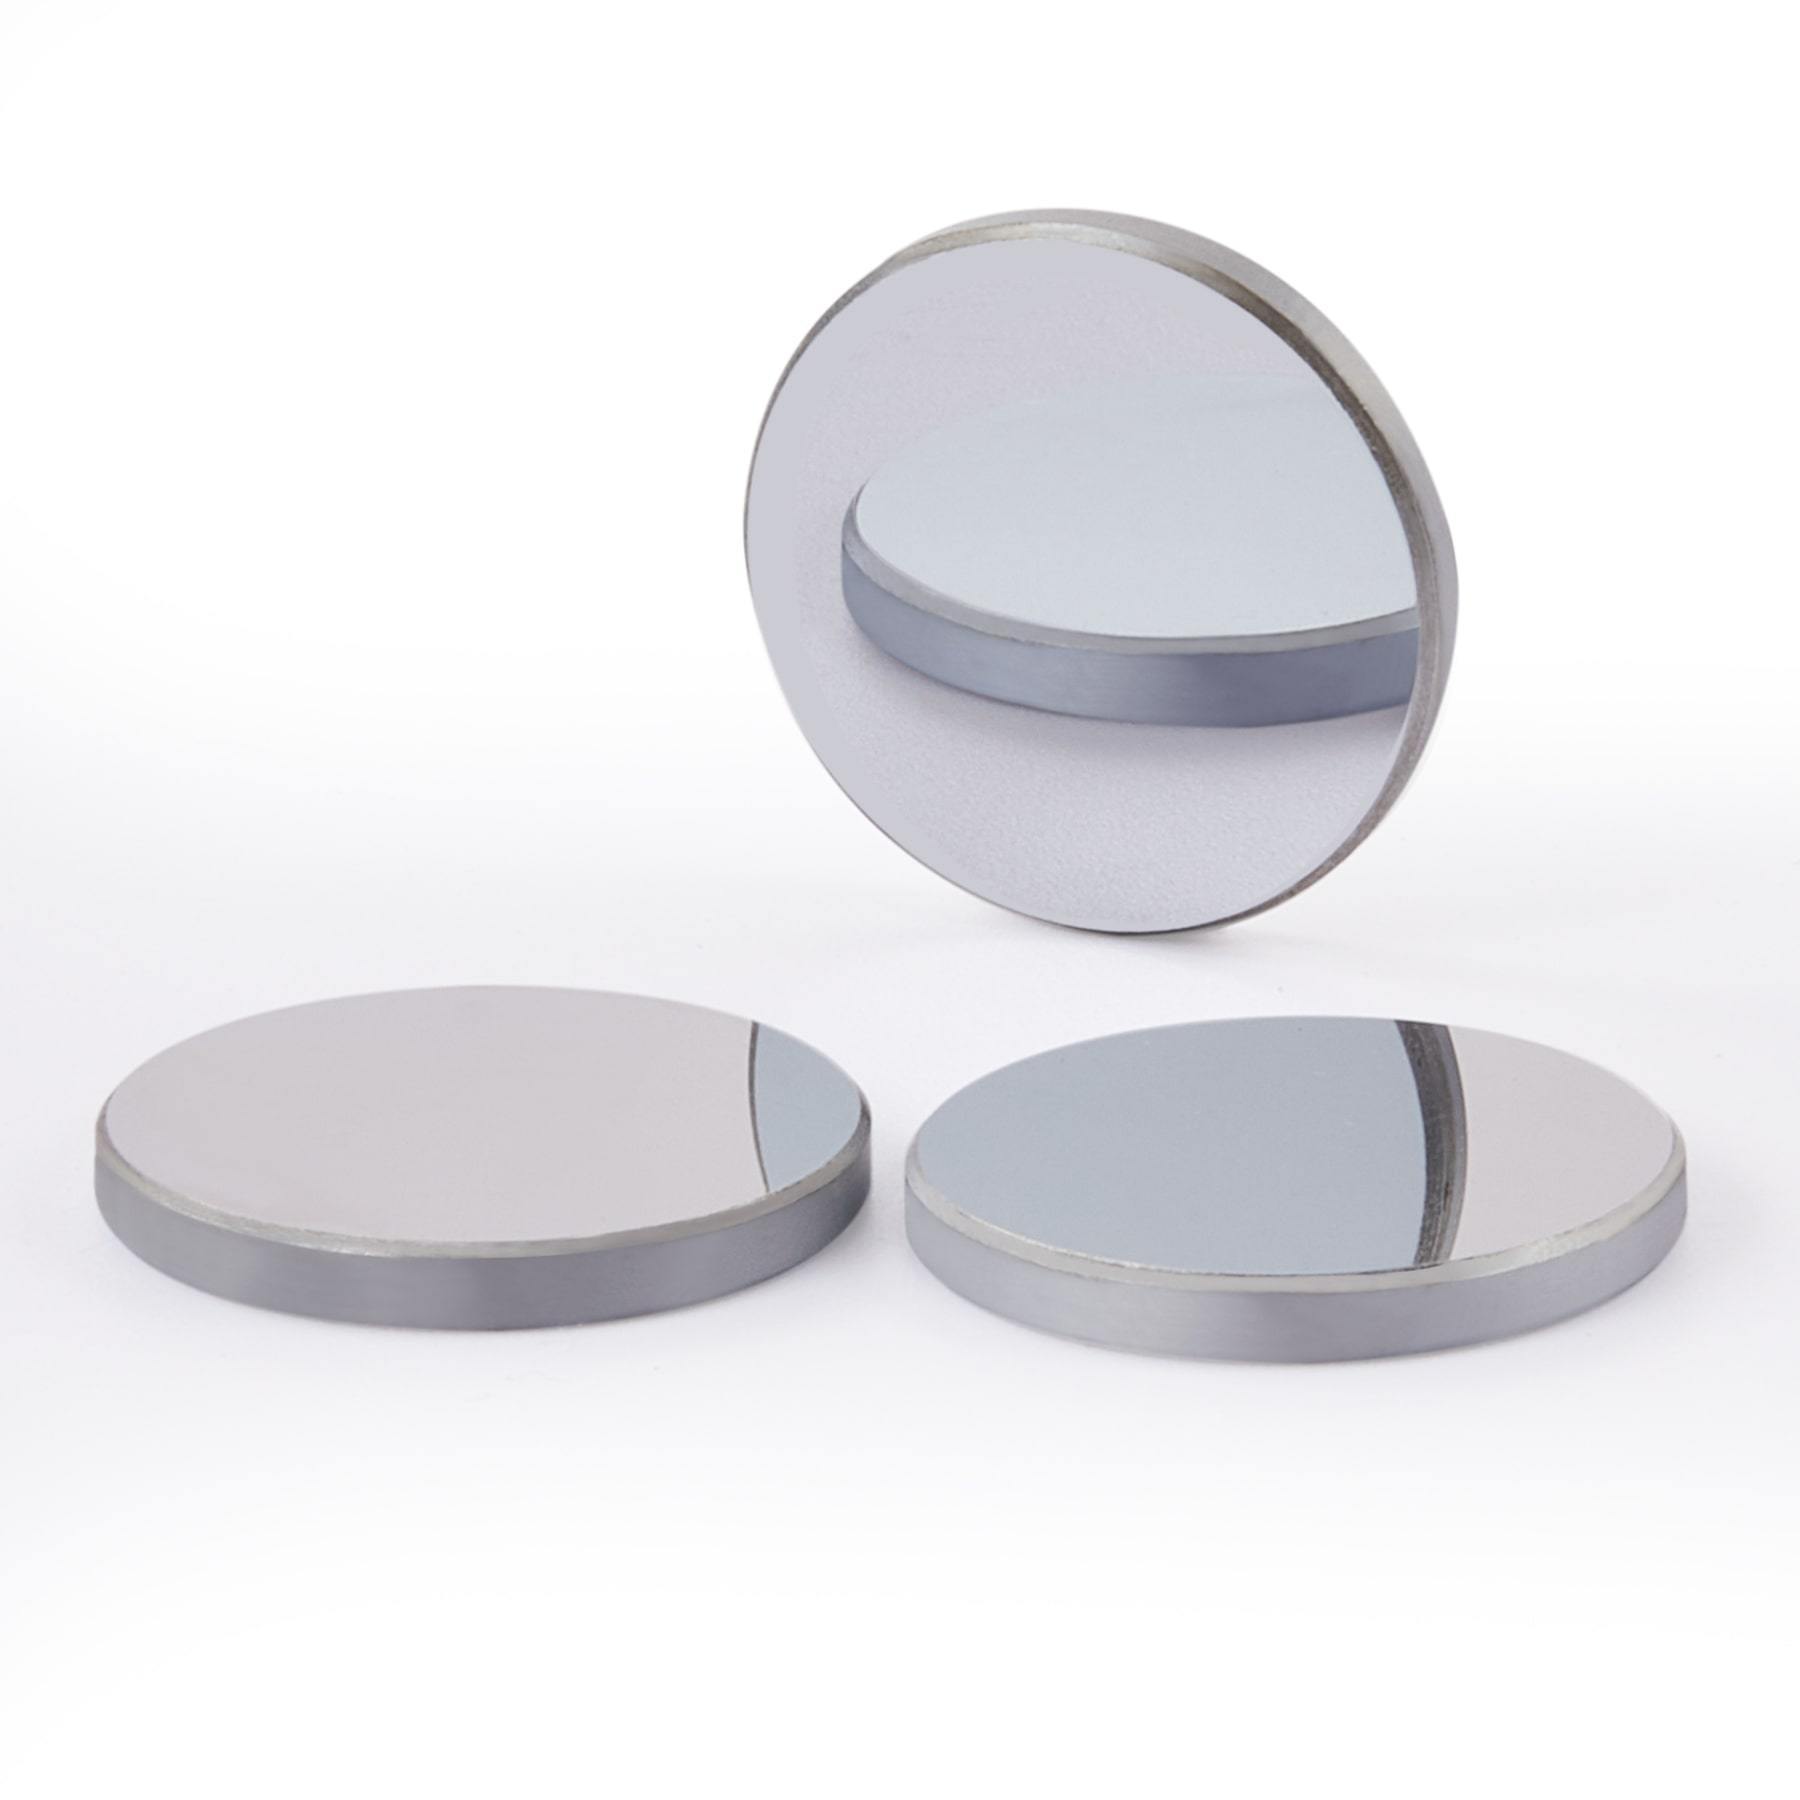 OMTech 25mm Molybdenum Mirrors for CO2 Laser Engraving Machines Set of 3 